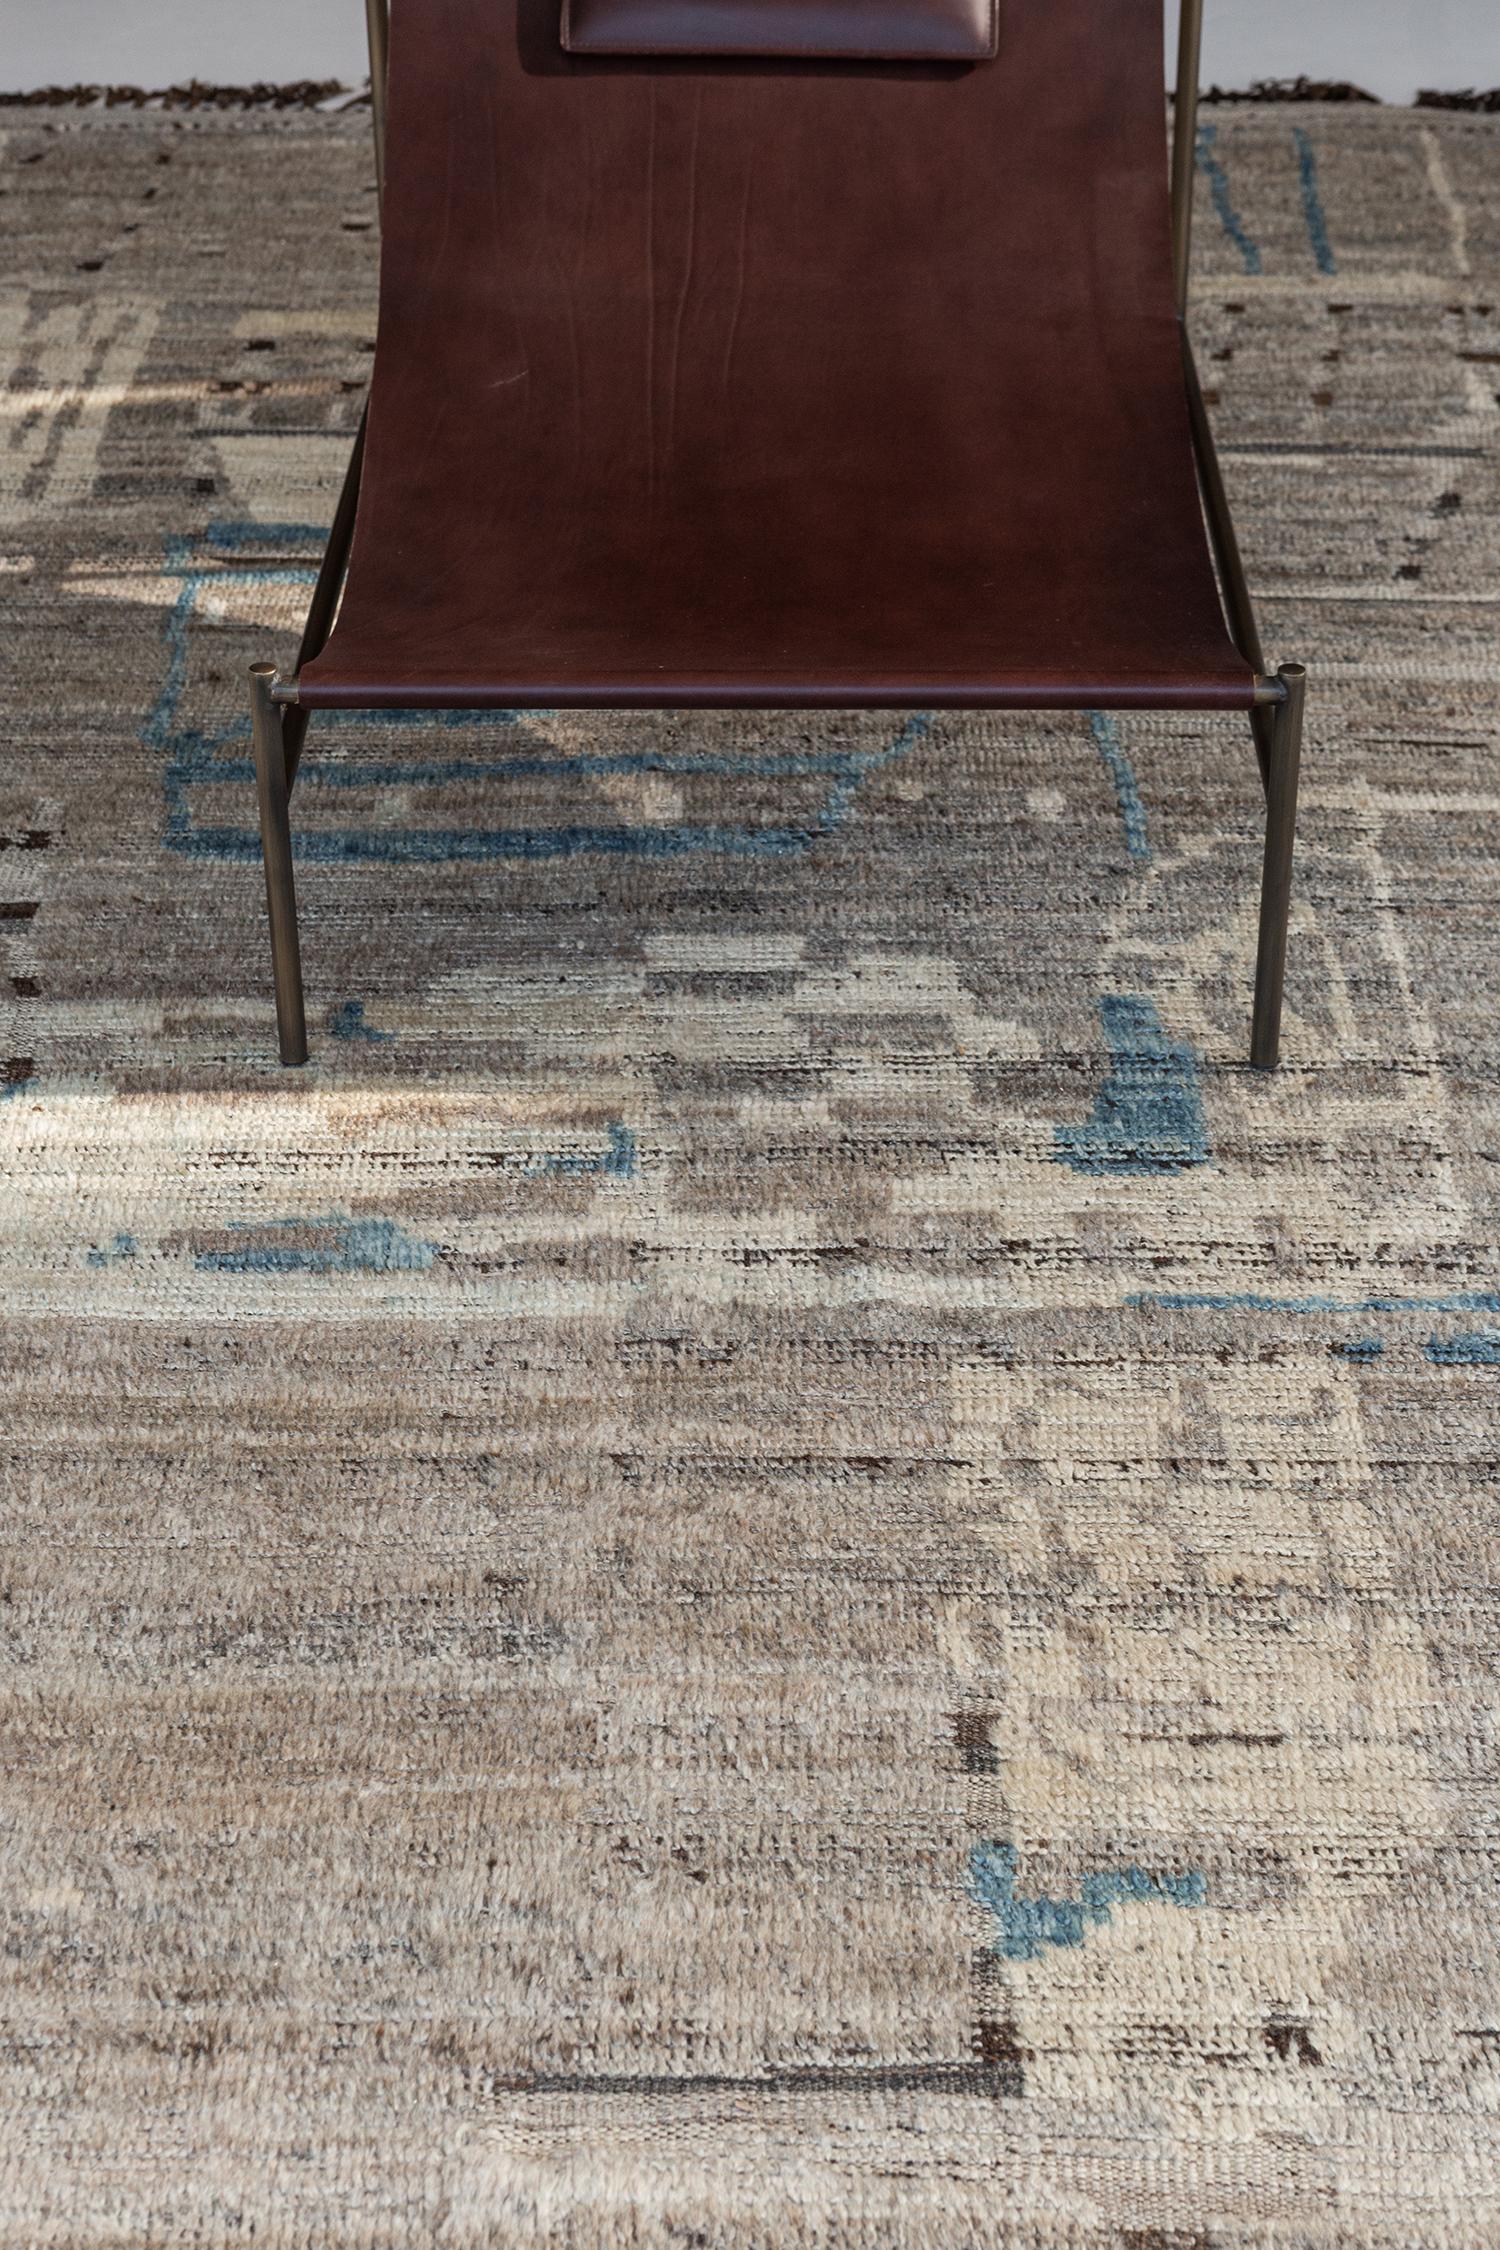 Meliska' is a captivating textured rug with irregular motifs inspired from the Atlas Mountains of Morocco. Earthy tones of ivory, taupe, cerulean blue and chocolate brown surrounded by umber brown shag work cohesively to make for a great